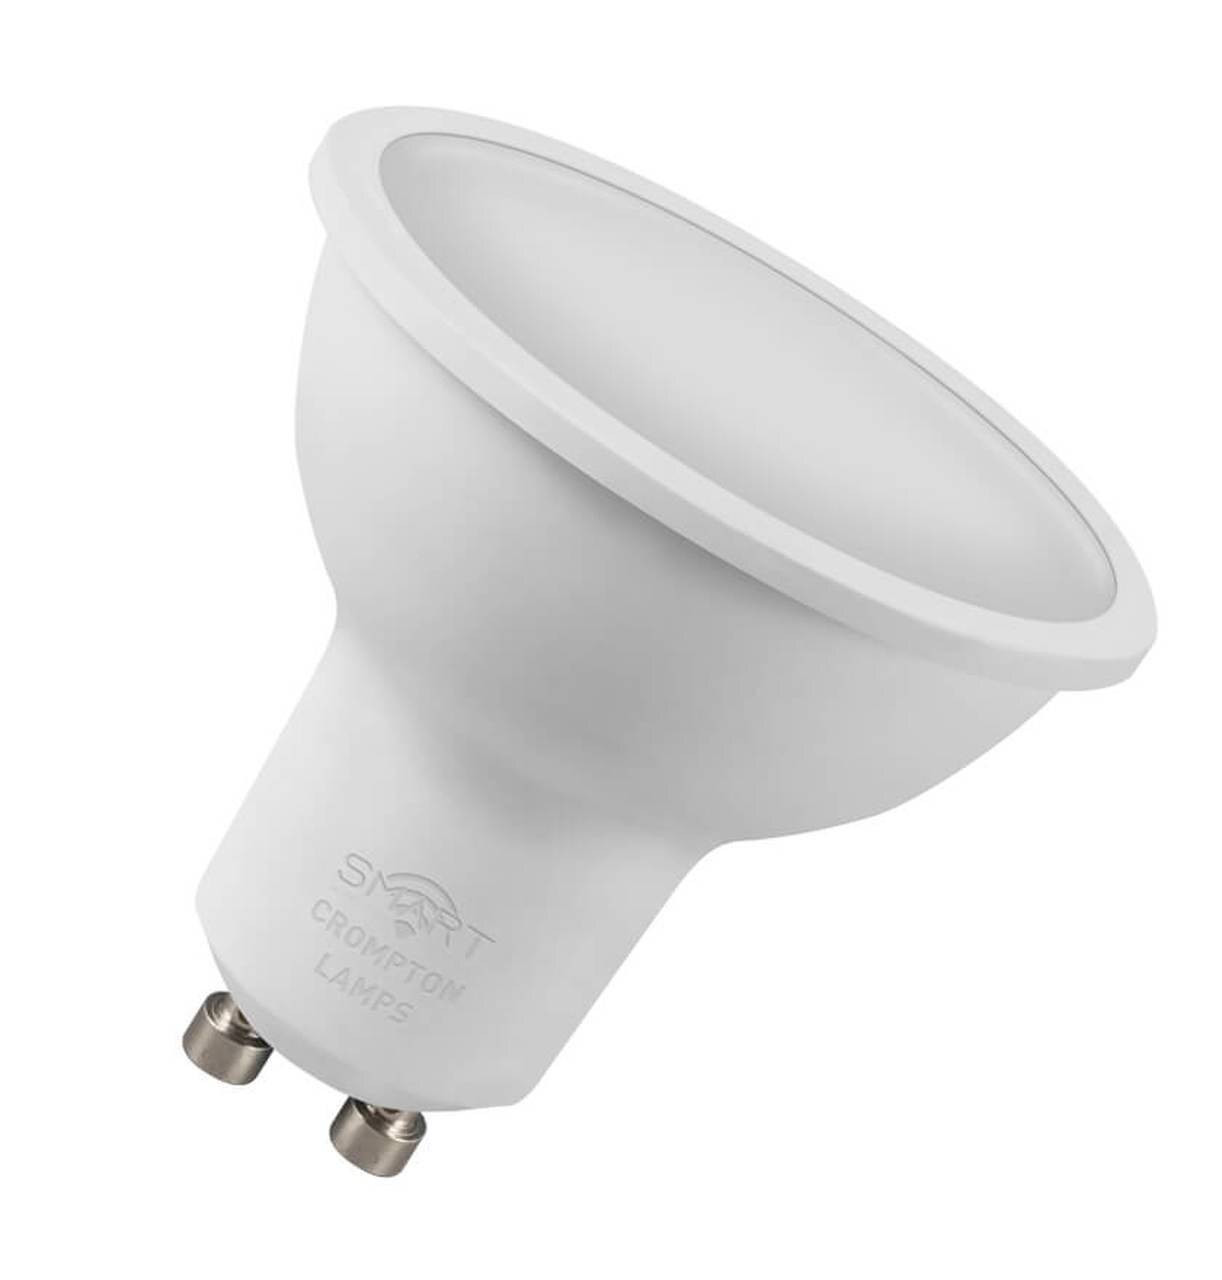 GU10 dimmable LED lamp WiFi Smart with app 5W 380 lm 2200-4000K